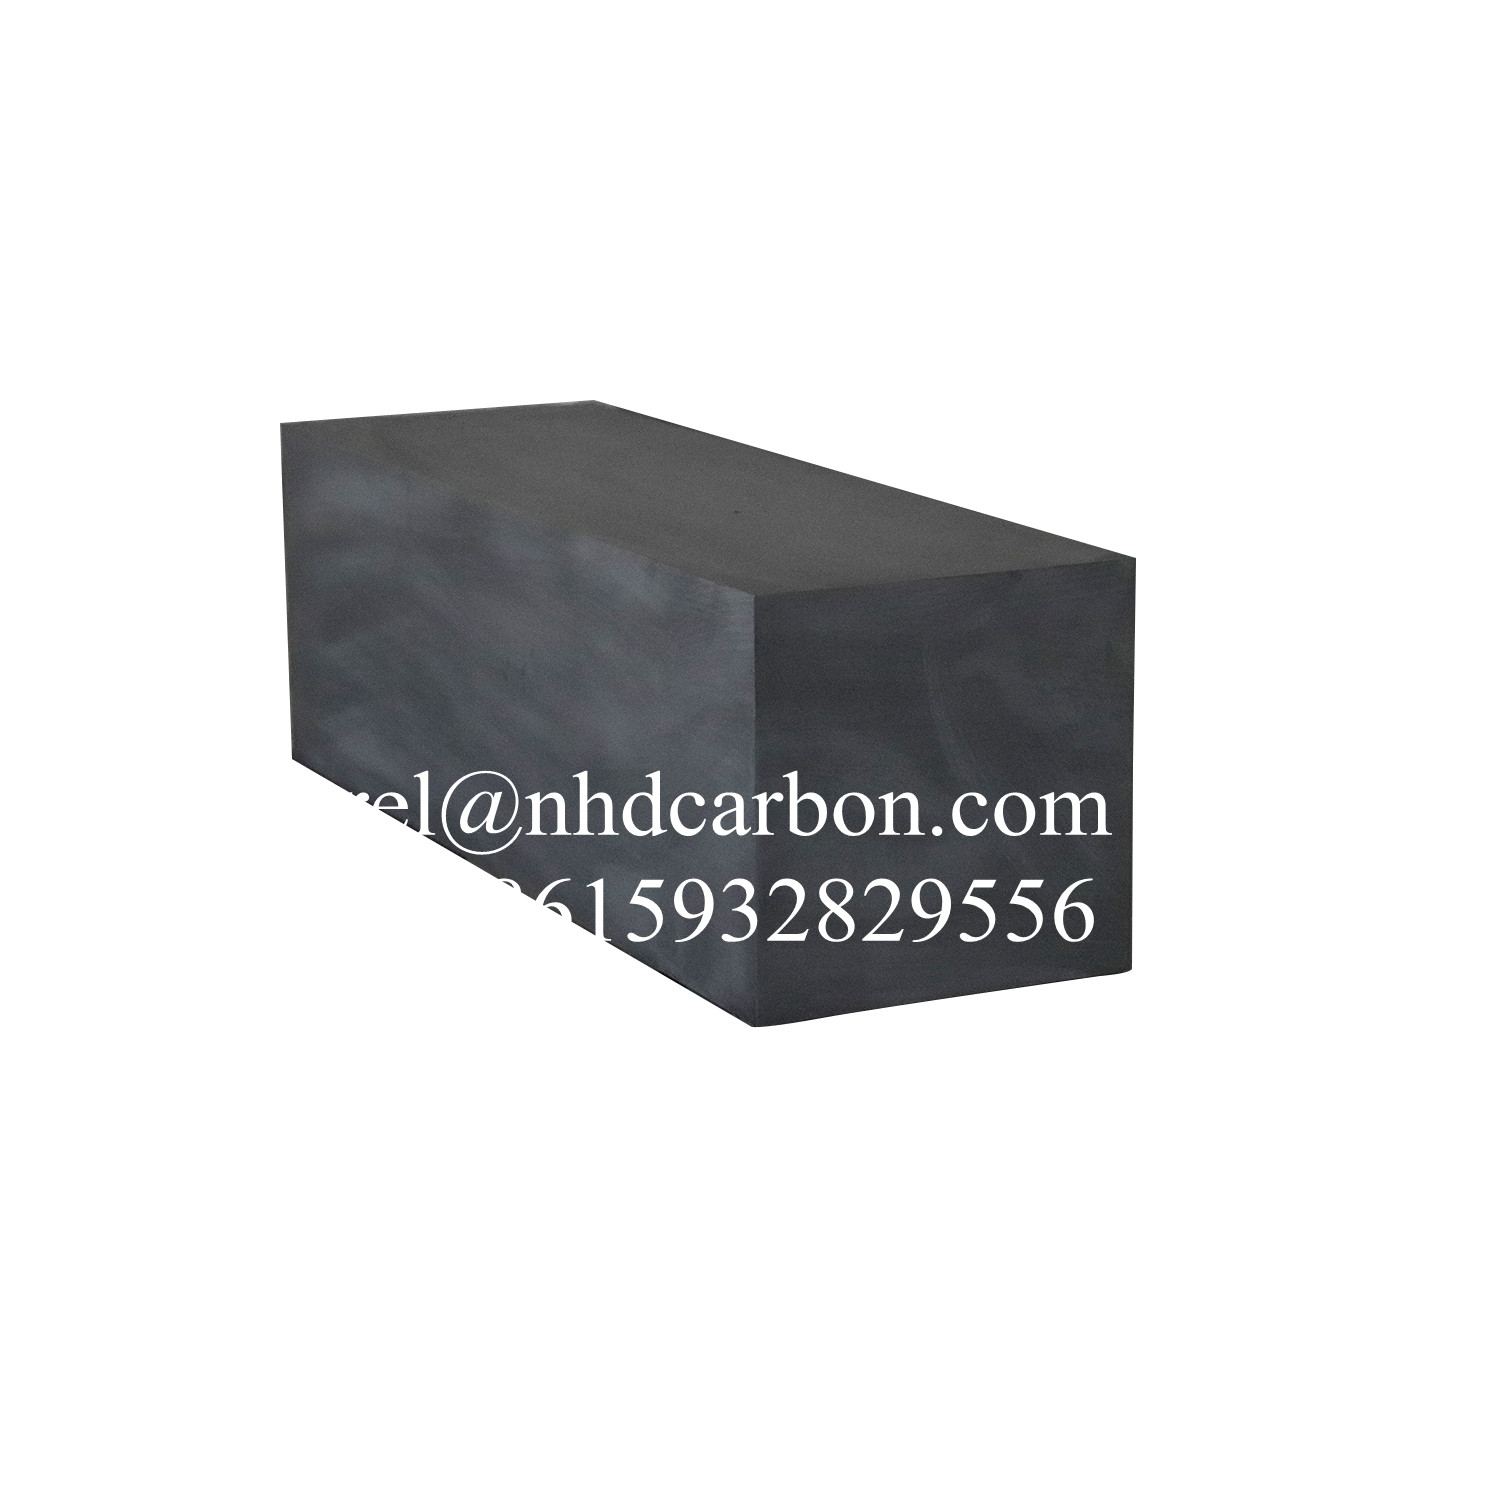 High purity molded Graphite block 